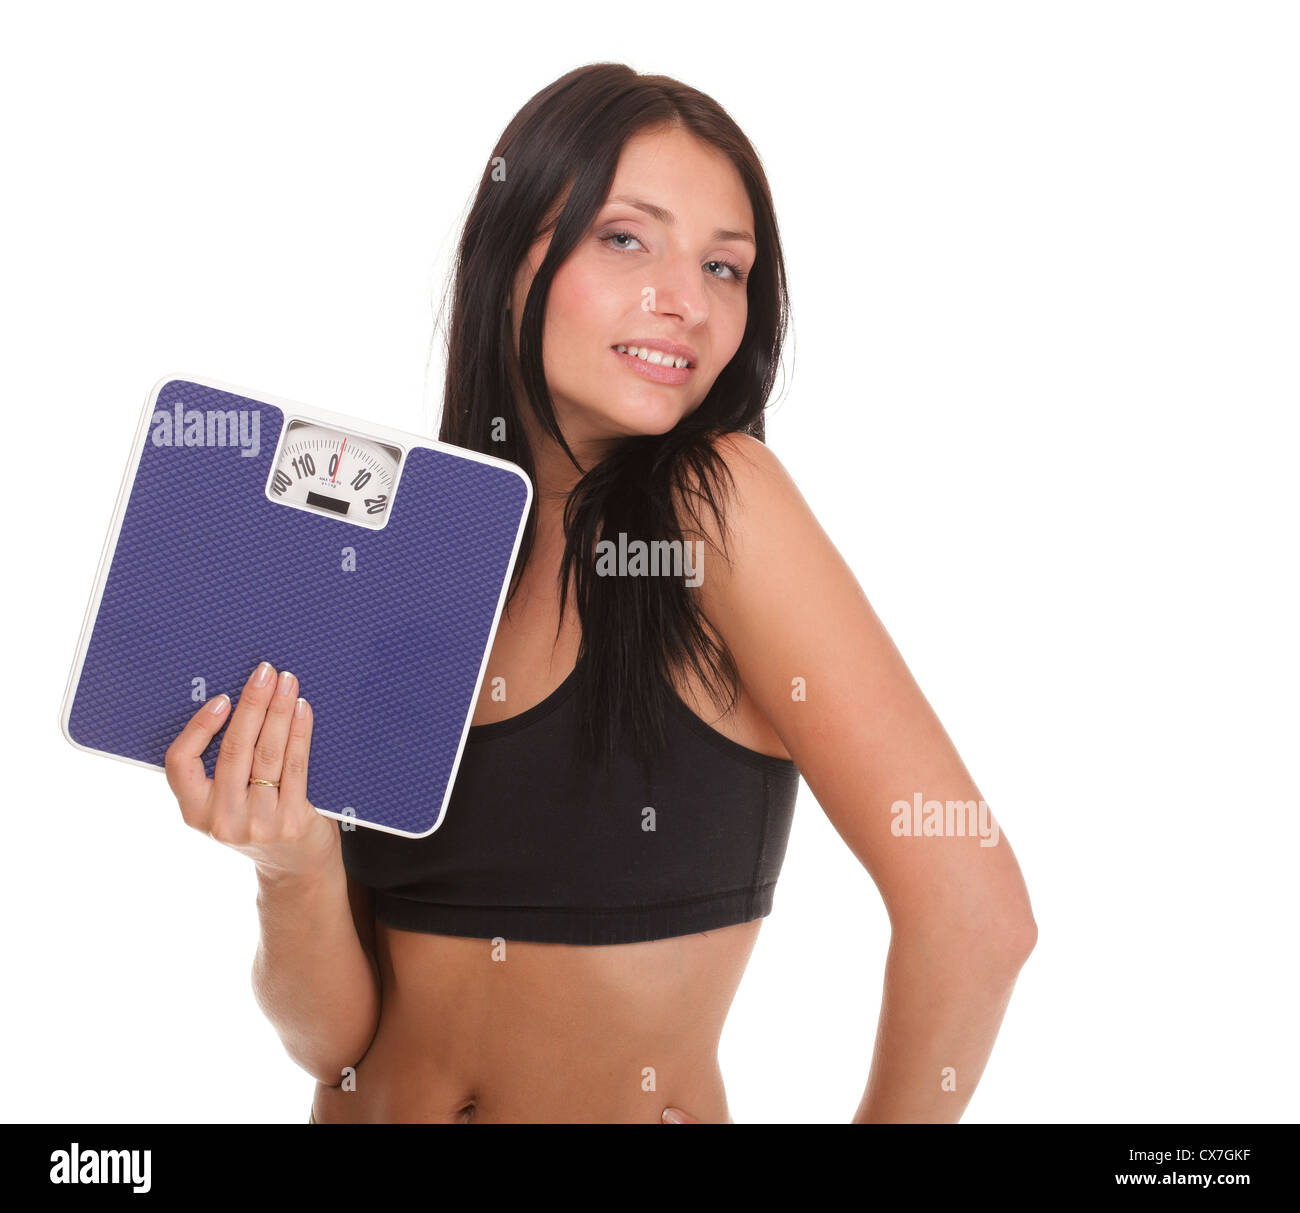 https://c8.alamy.com/comp/CX7GKF/weight-loss-woman-on-scale-happy-scales-over-white-CX7GKF.jpg